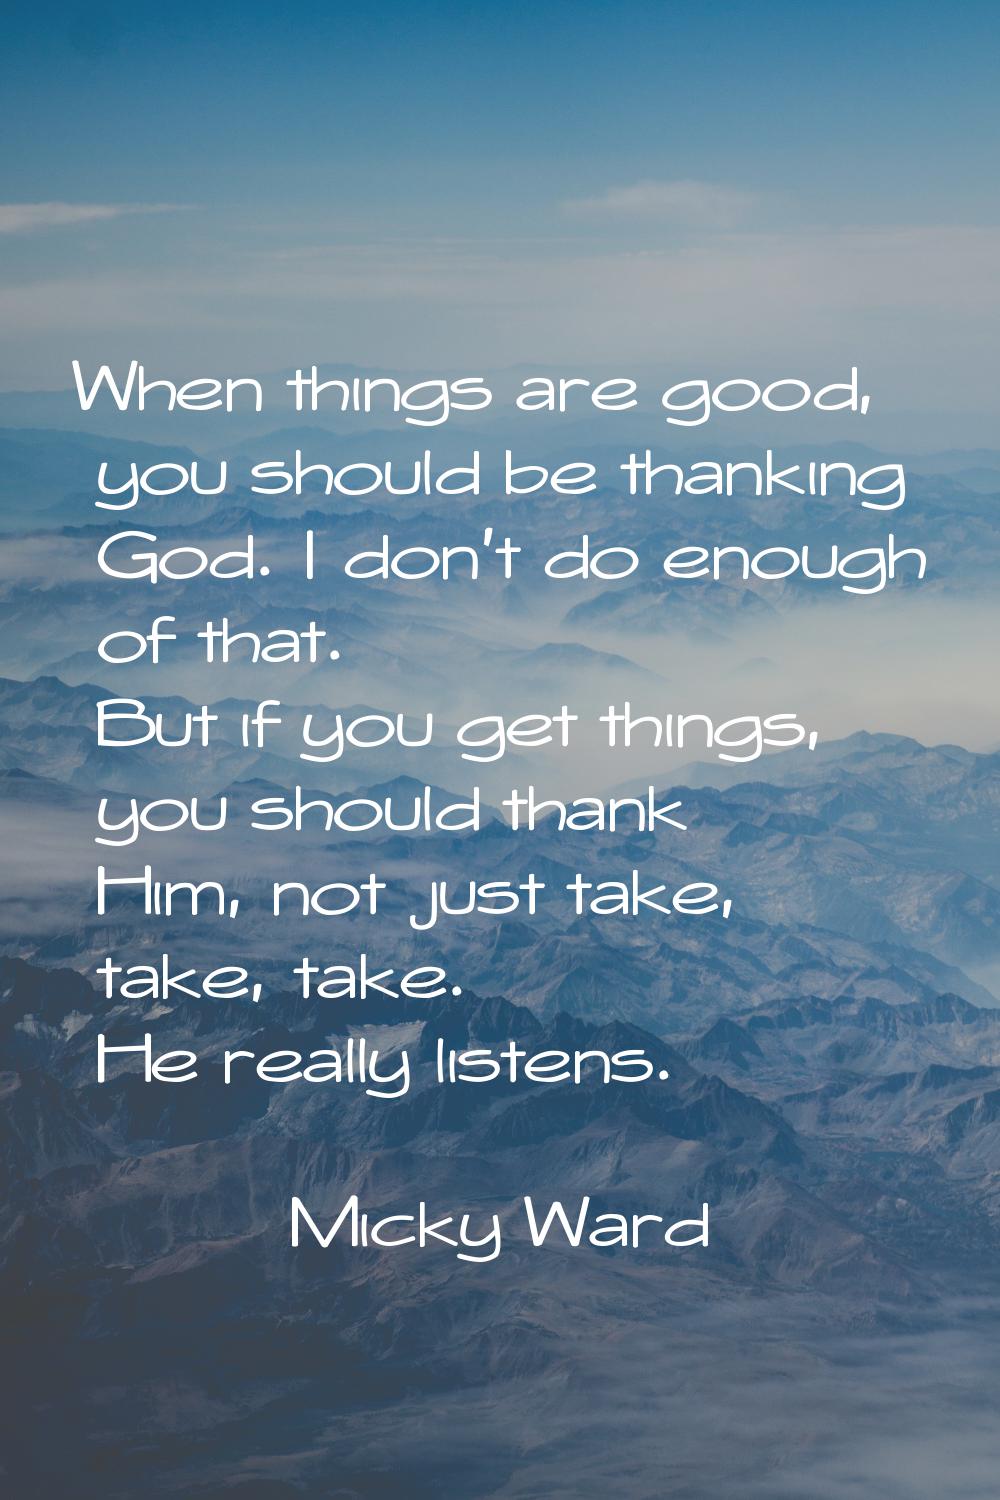 When things are good, you should be thanking God. I don't do enough of that. But if you get things,